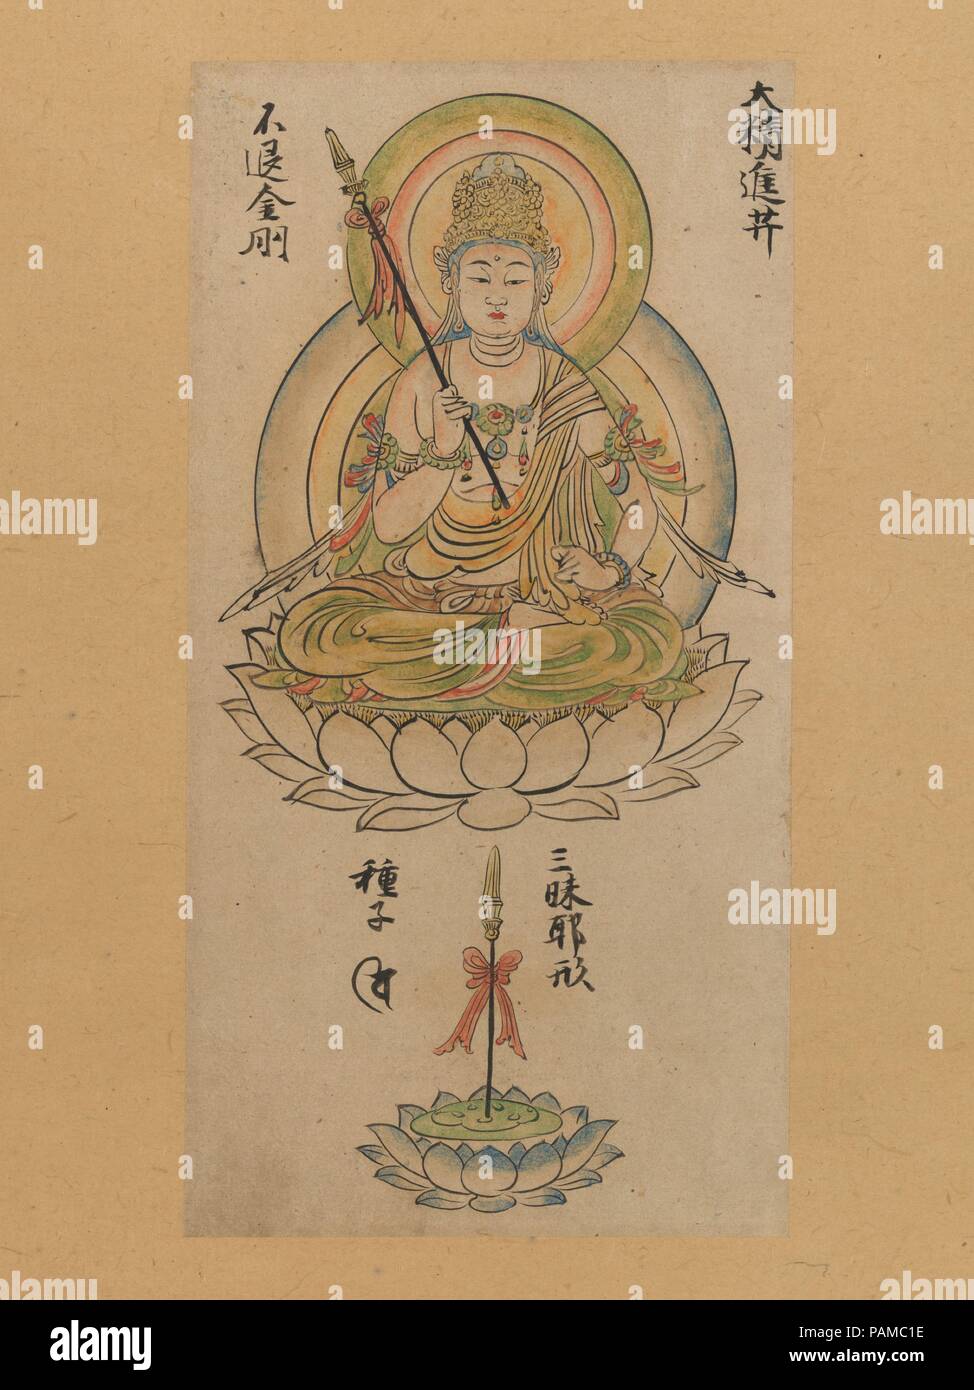 Daishojin Bosatsu, from 'Album of Buddhist Deities from the Diamond World and Womb World Mandalas' ('Kontai butsugajo'). Artist: Attributed to Takuma Tameto (Japanese, active ca. 1132-74). Culture: Japan. Dimensions: Image: 9 3/4 in. × 5 in. (24.7 × 12.7 cm)  Overall with mounting: 46 1/16 × 14 3/16 in. (117 × 36 cm)  Overall with knobs: 46 1/16 × 15 7/8 in. (117 × 40.3 cm). Date: 12th century.  A serene bodhisattva, or compassionate Buddhist deity, wearing an elaborate golden crown sits on a large lotus pedestal. The rainbow of colors on the body, garments, and halo are remarkably preserved f Stock Photo